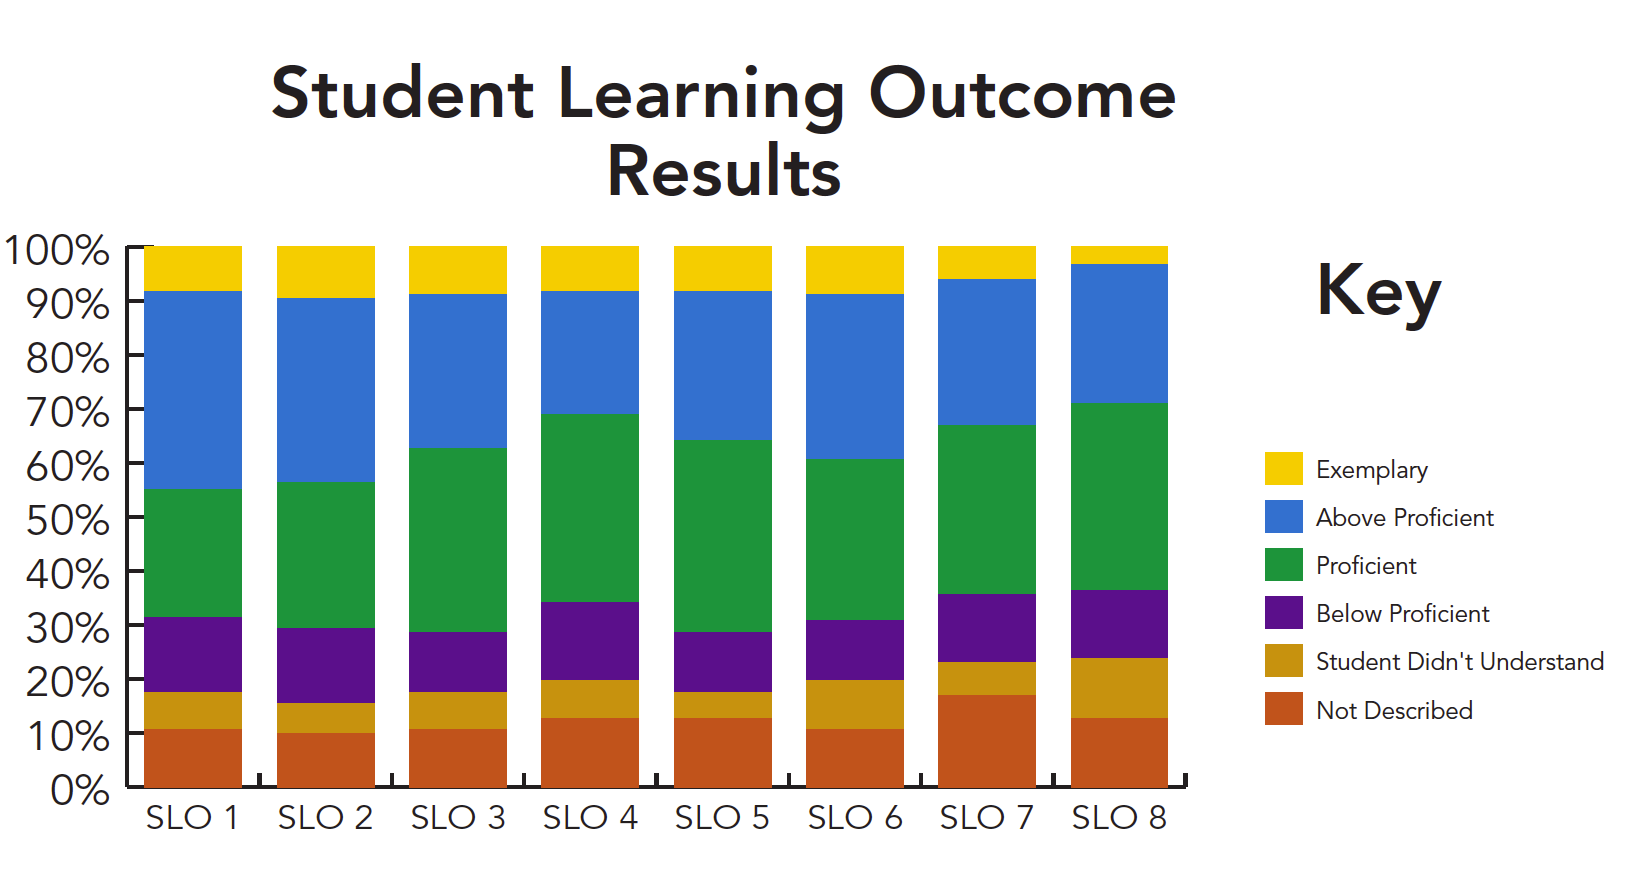 Student Learning Outcome Results